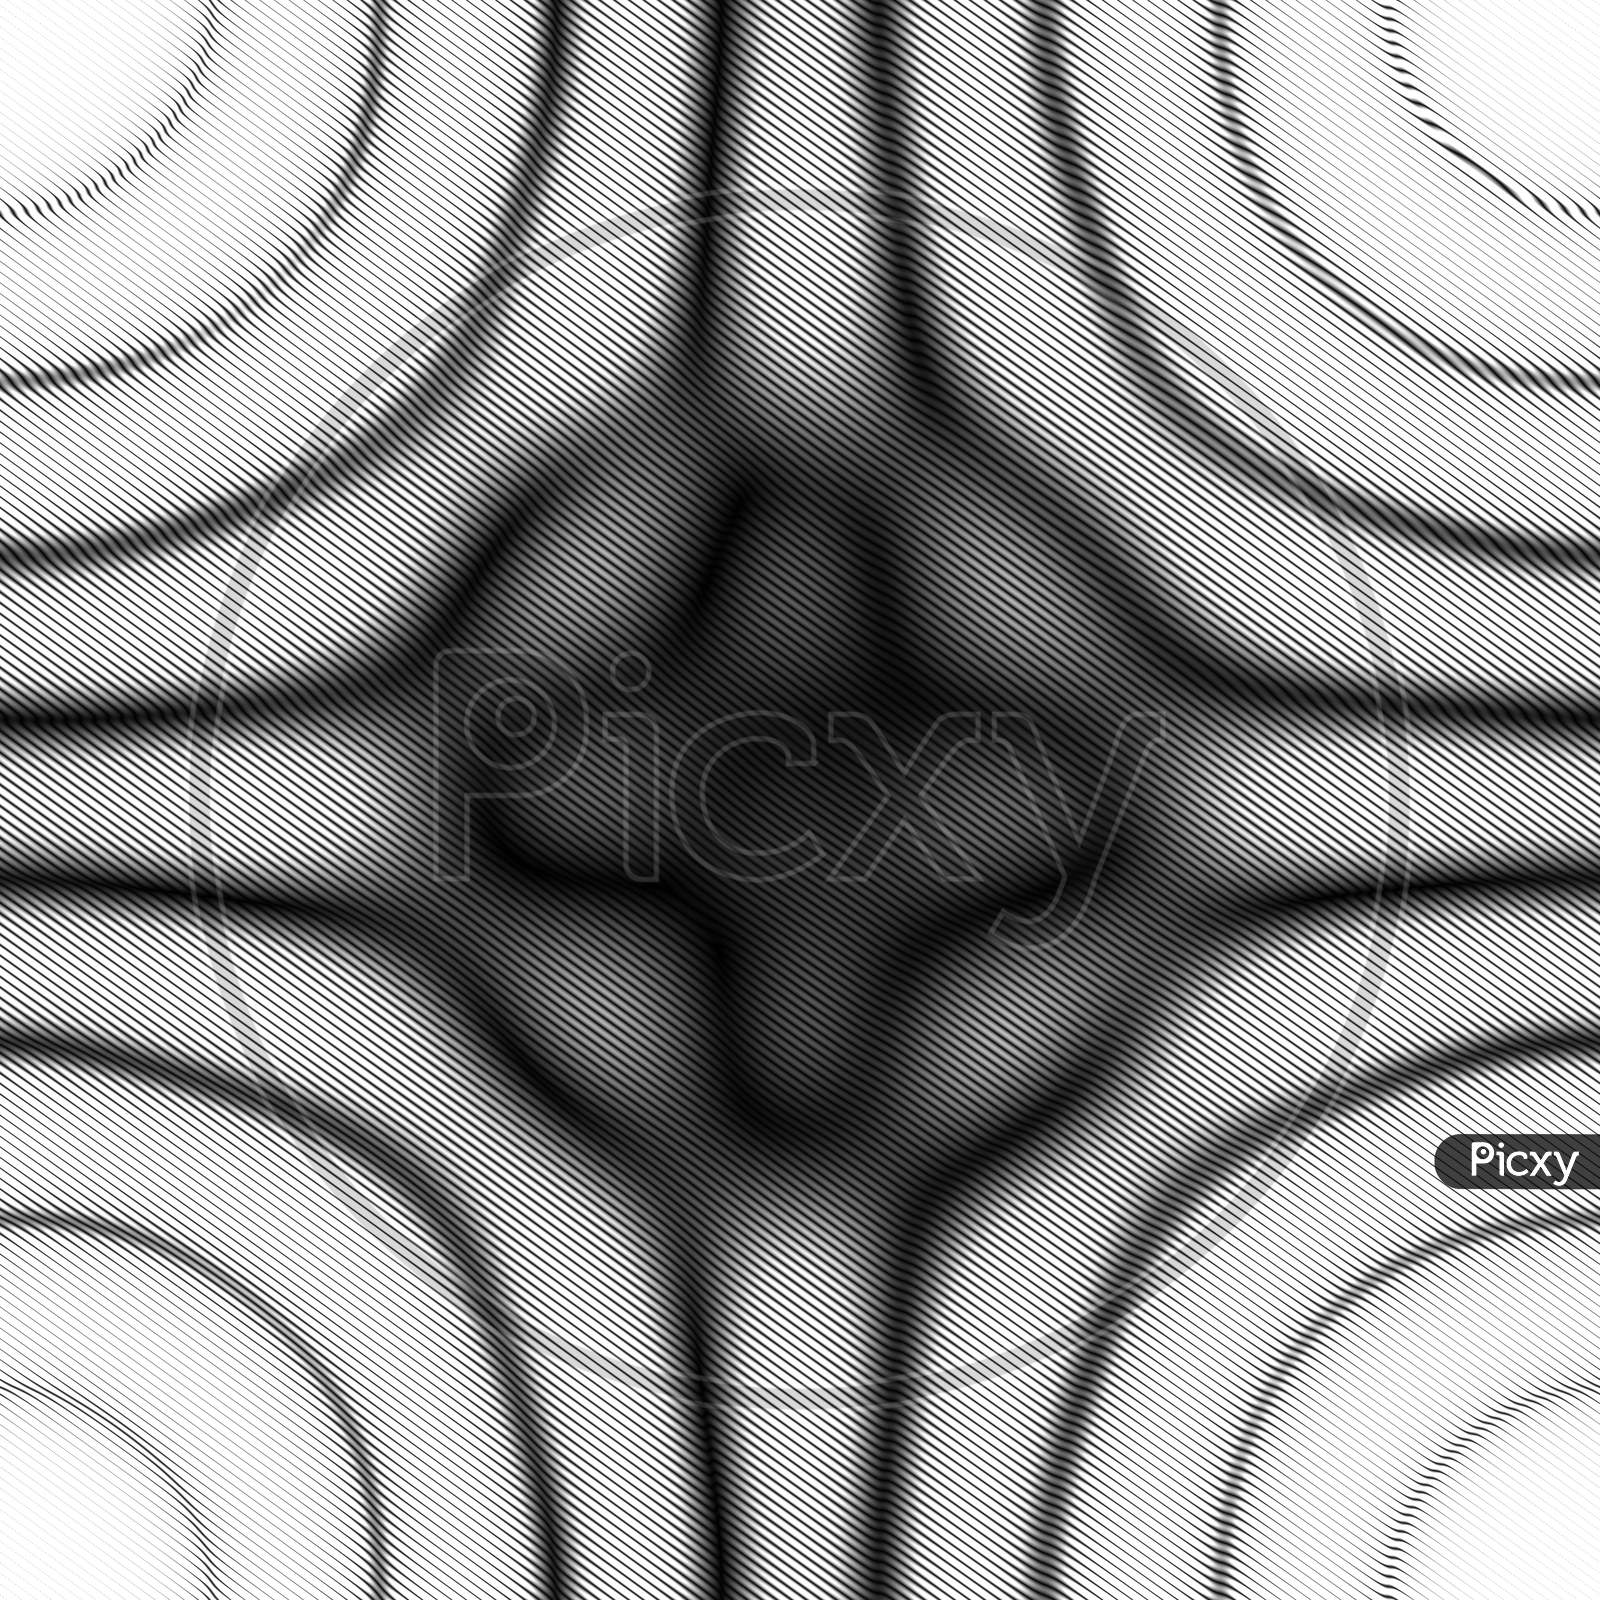 Grey Abstract Background